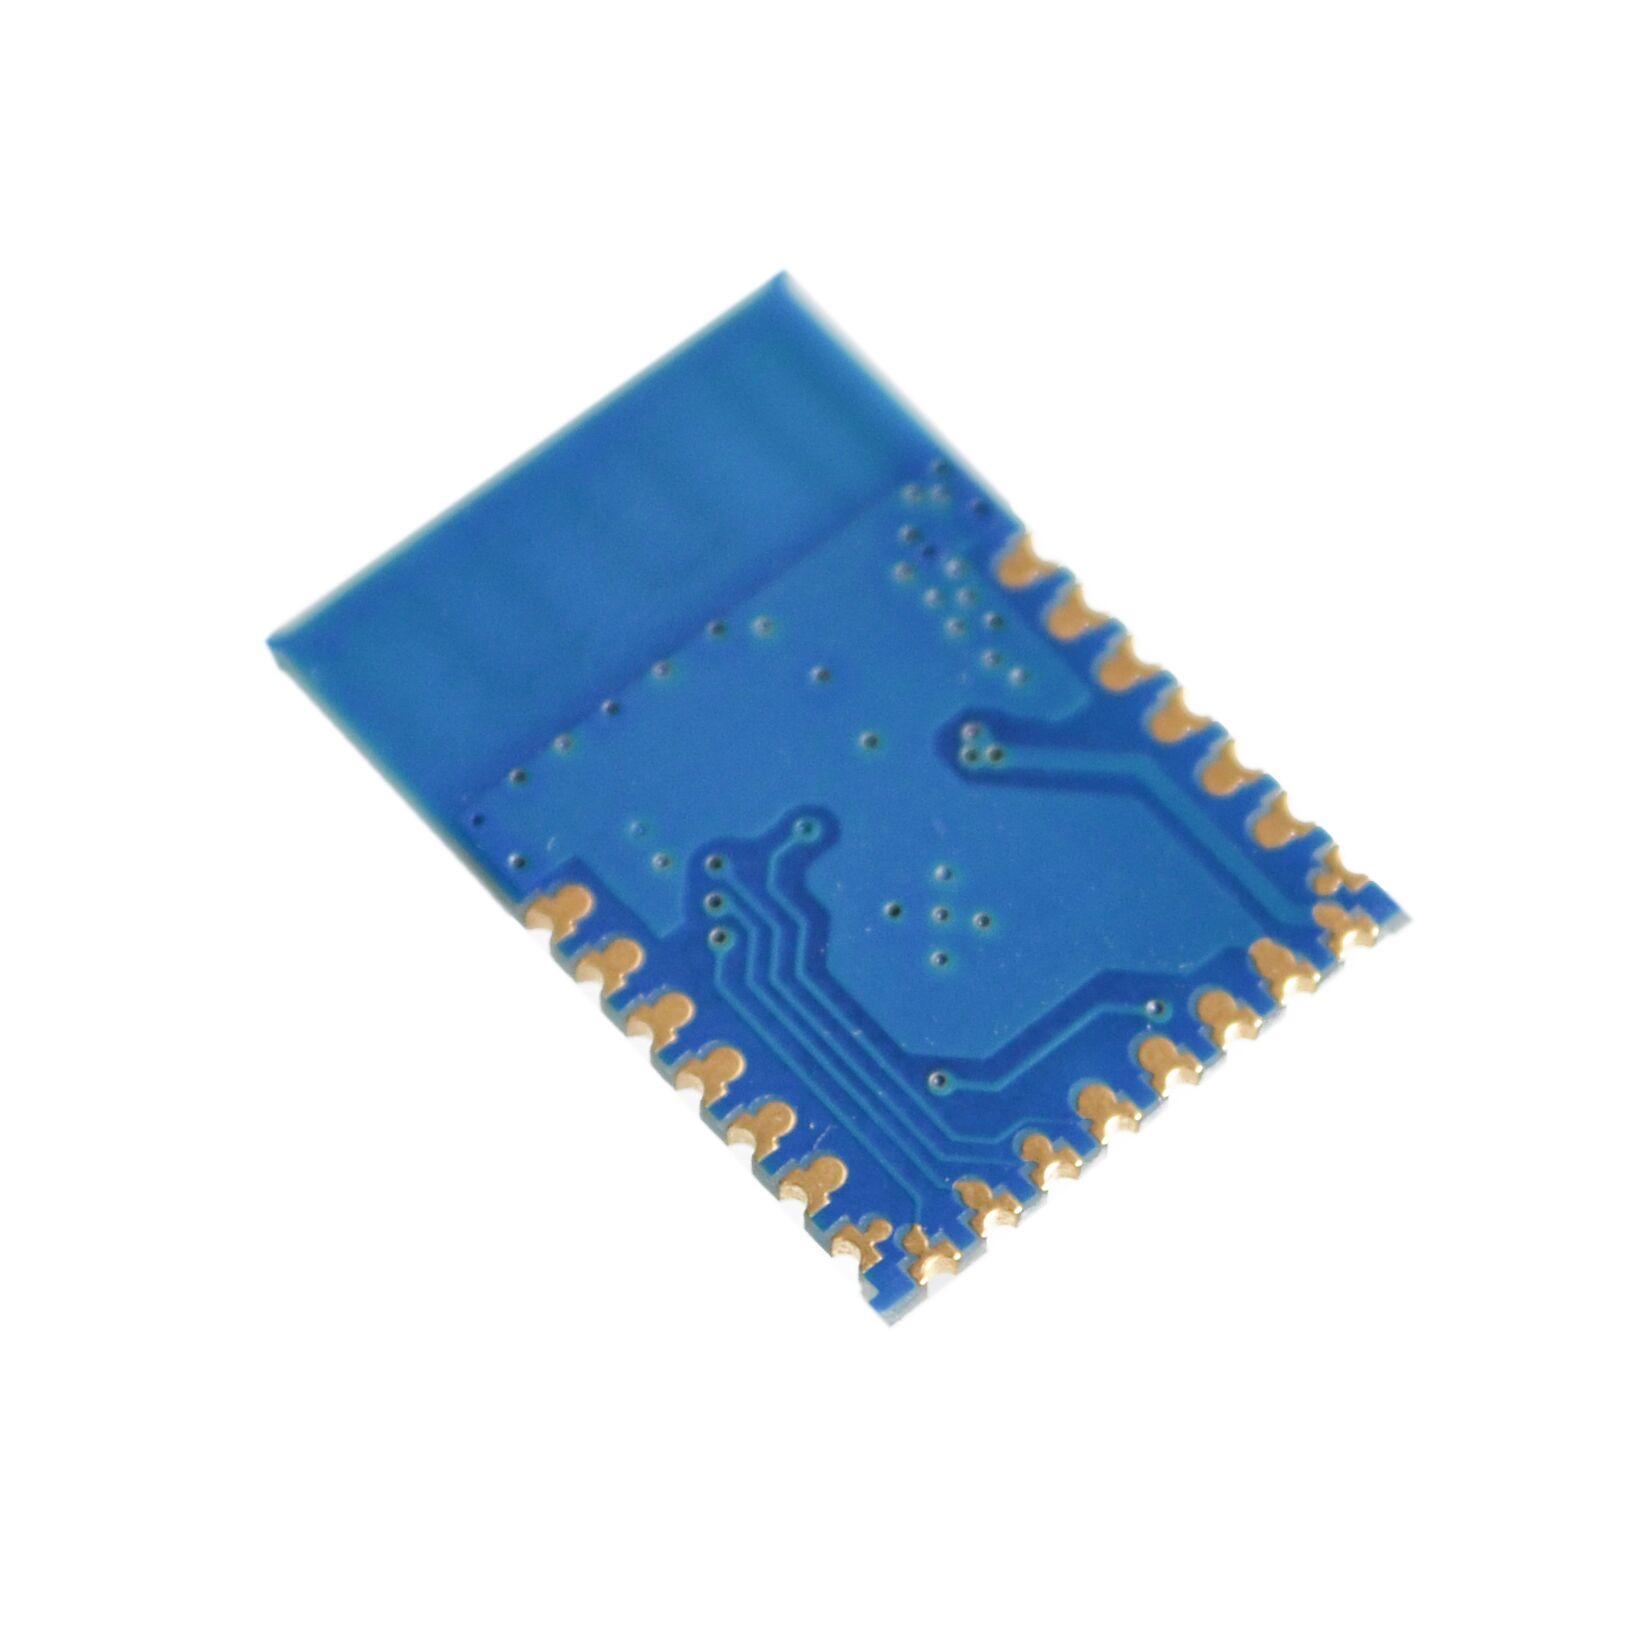 JDY-10-BLE-Bluetooth-4-0-Uart-Transceiver-Module-CC2541-Central-Switching-Wireless-Module-iBeacon